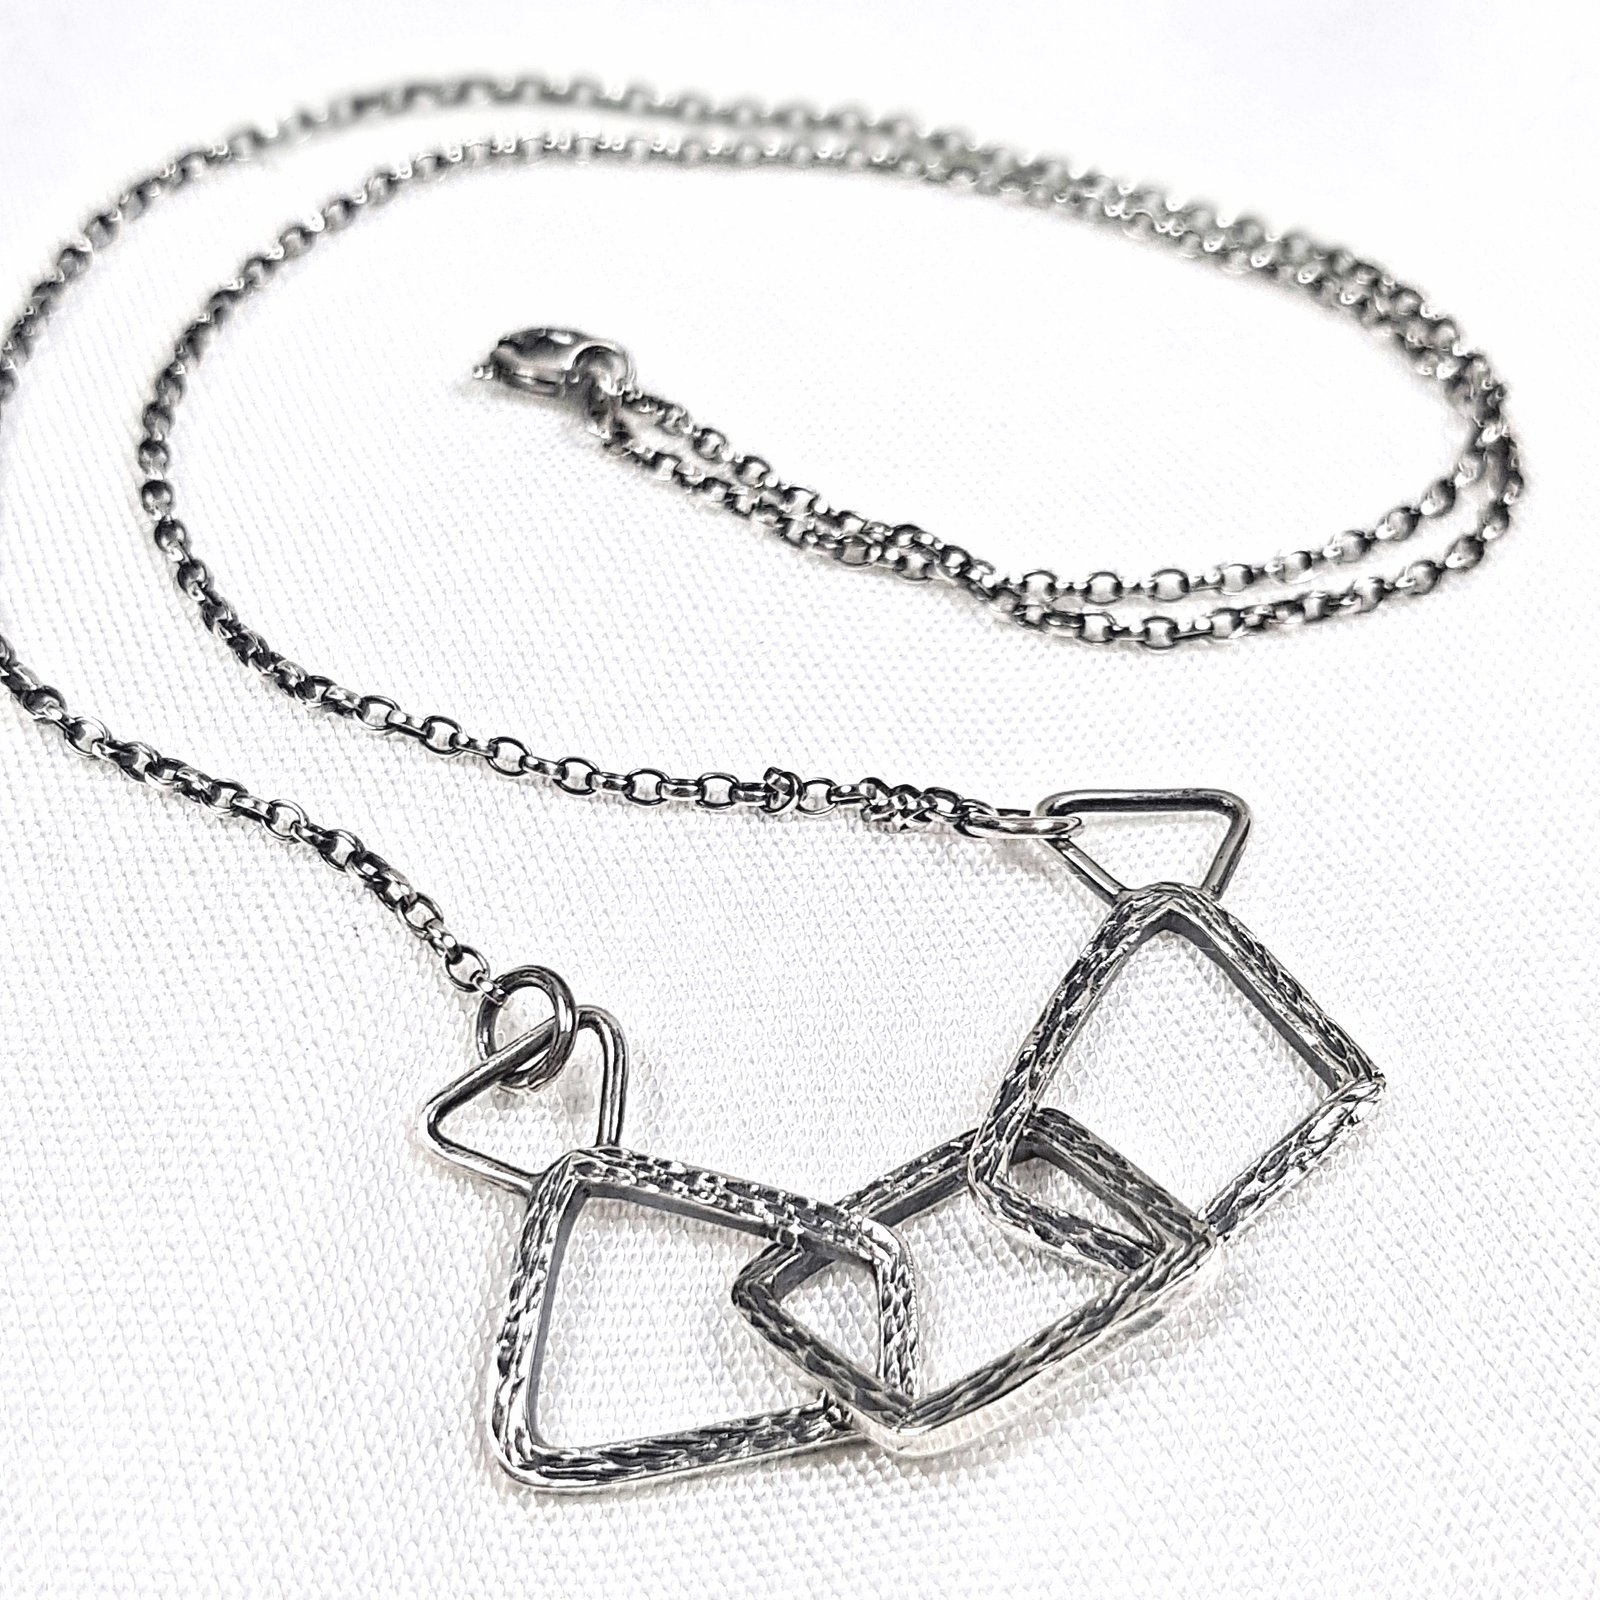 Women's Silver Necklaces | Sterling Silver Necklaces | Next UK